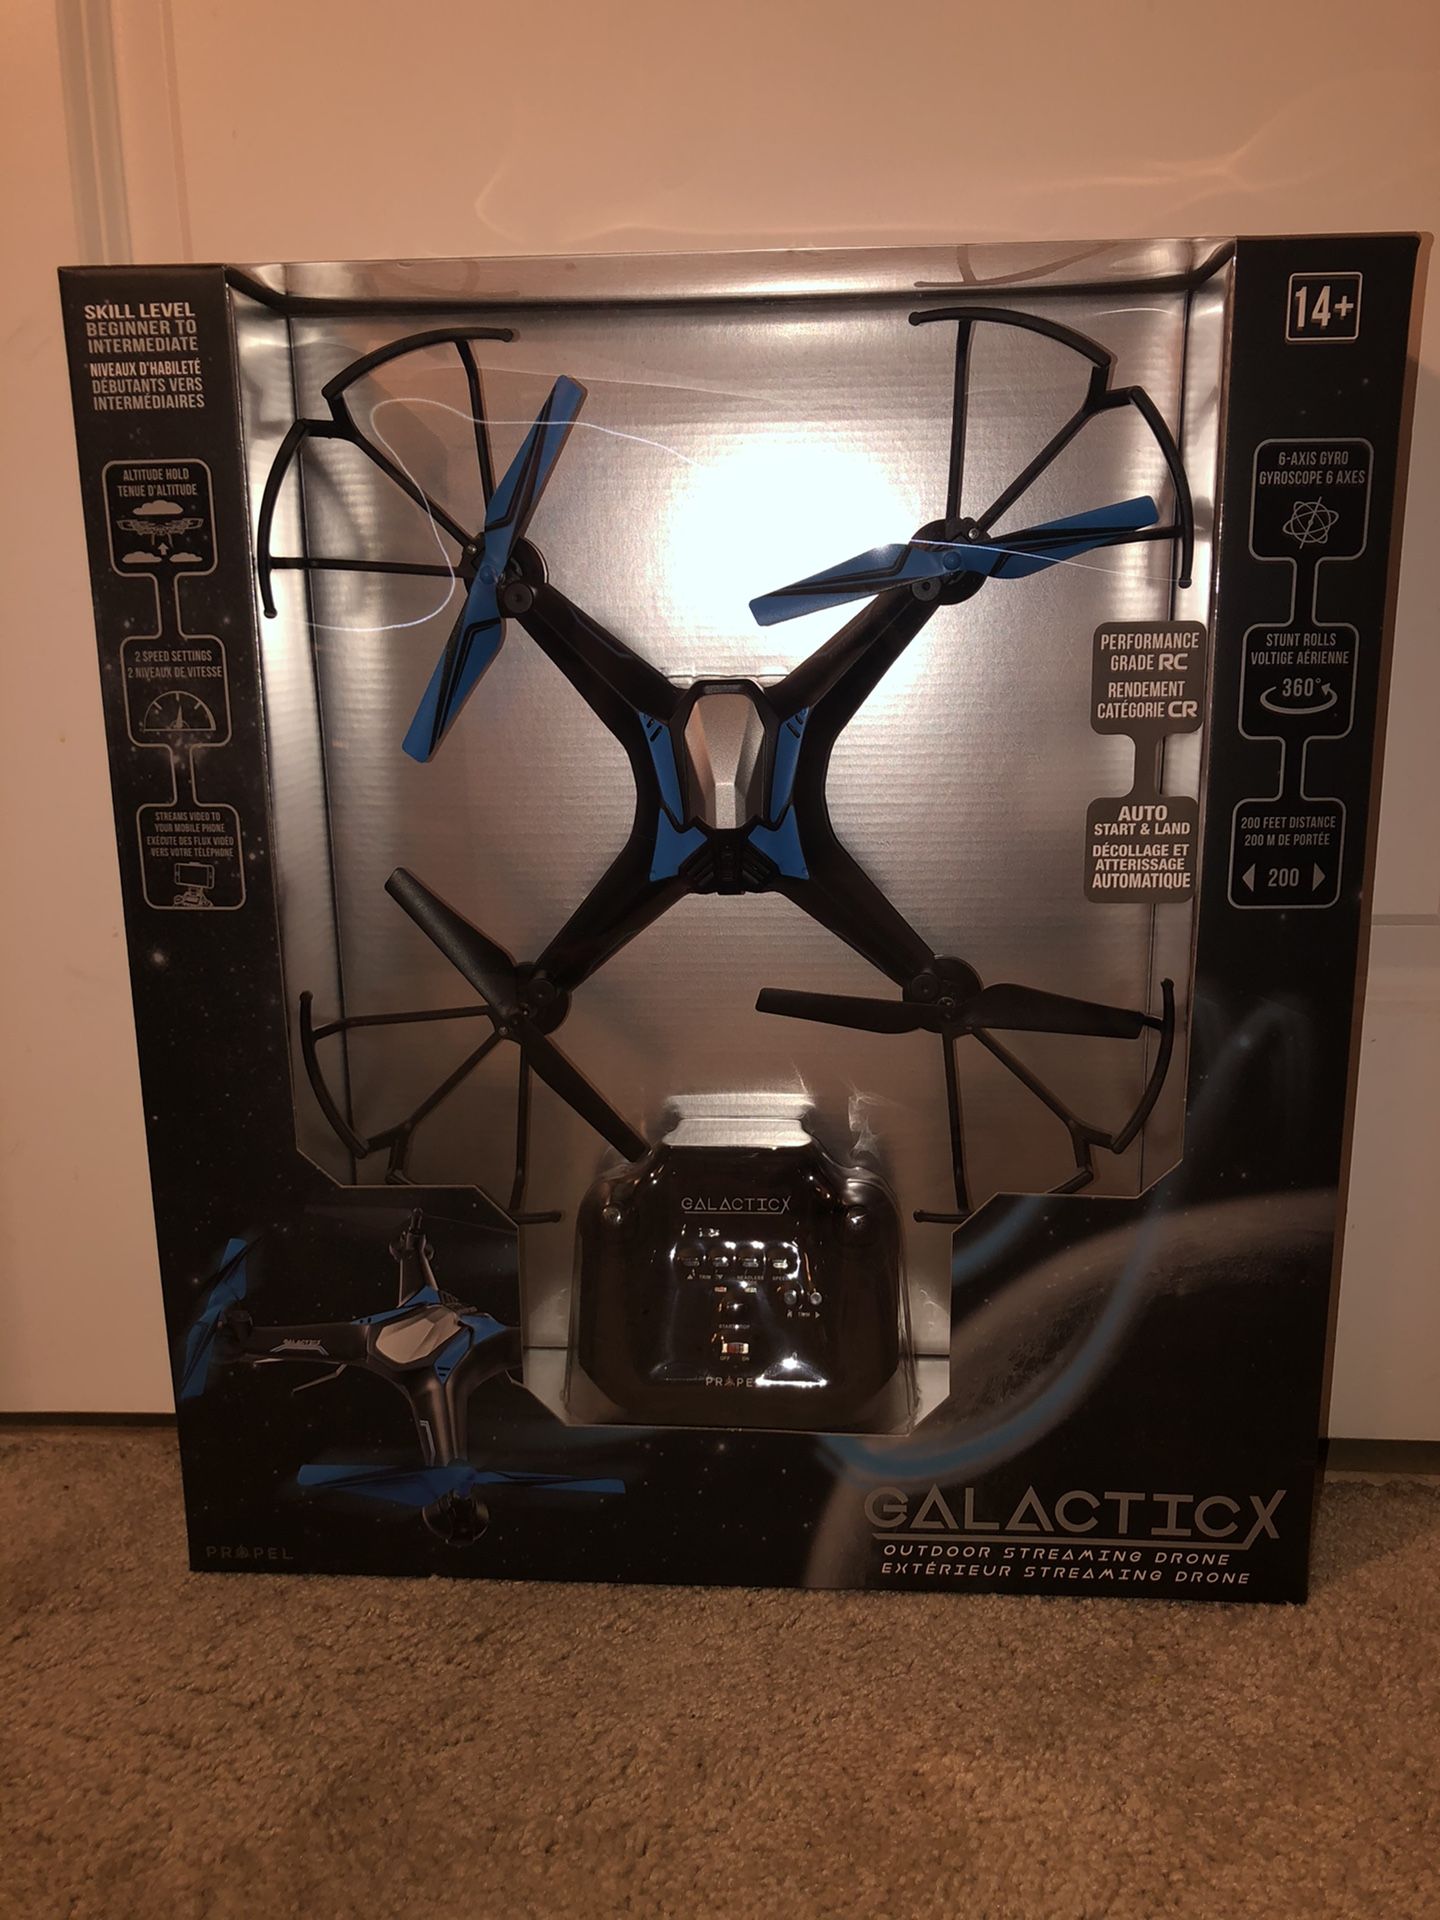 Galactic X outdoor streaming drone